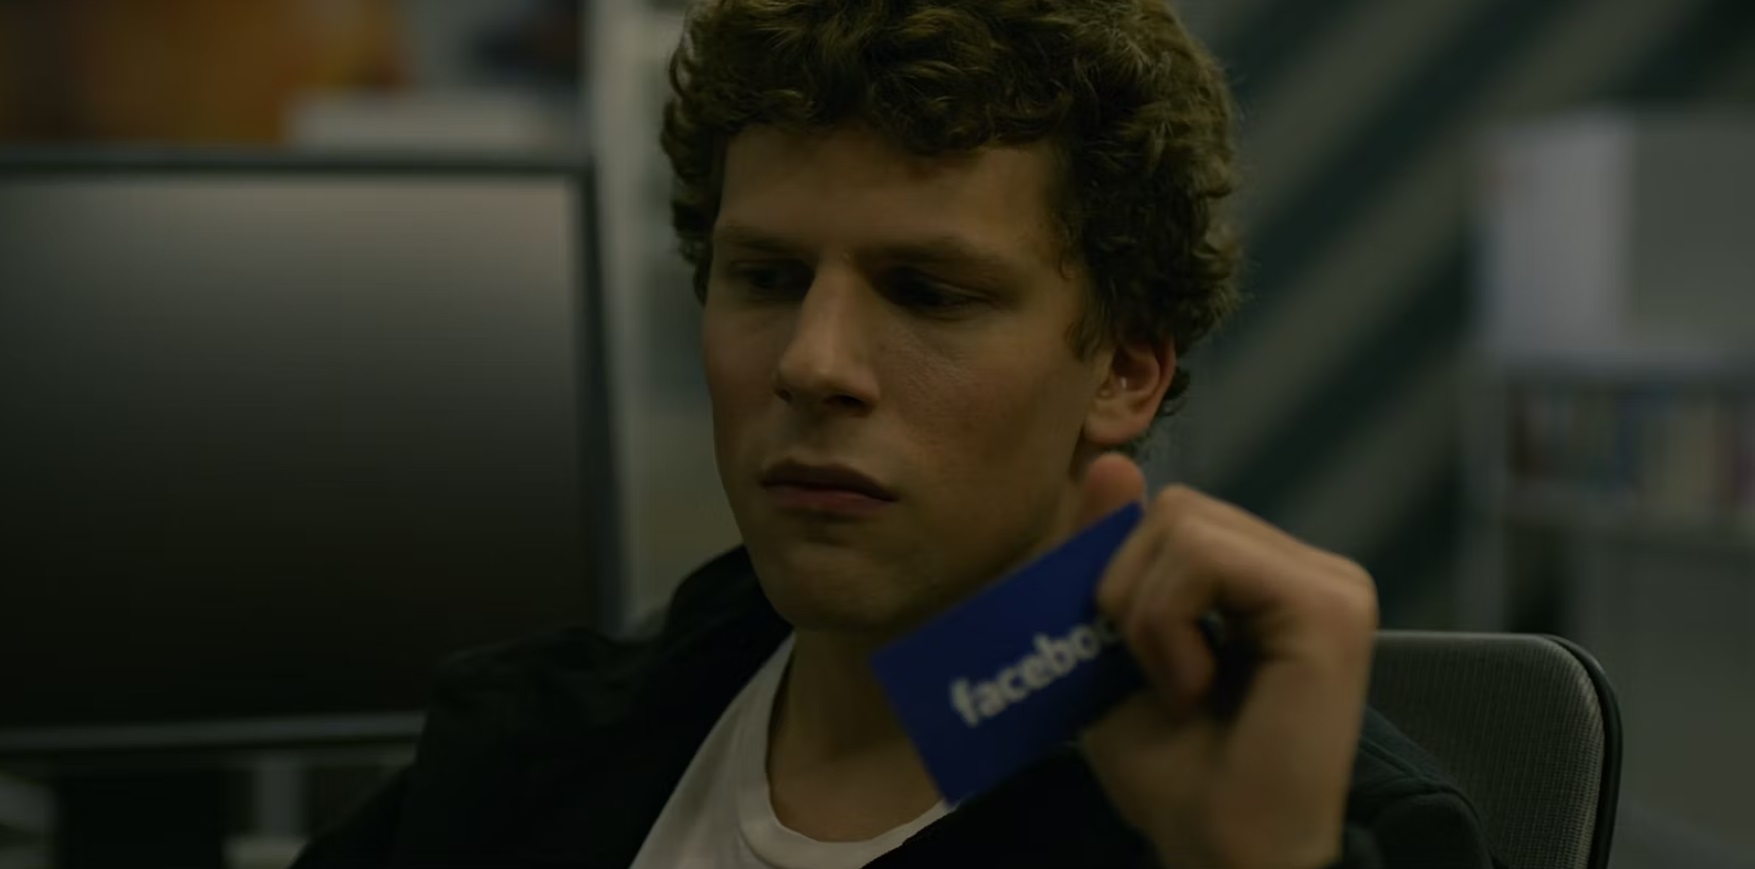 The Social Network by David Fincher